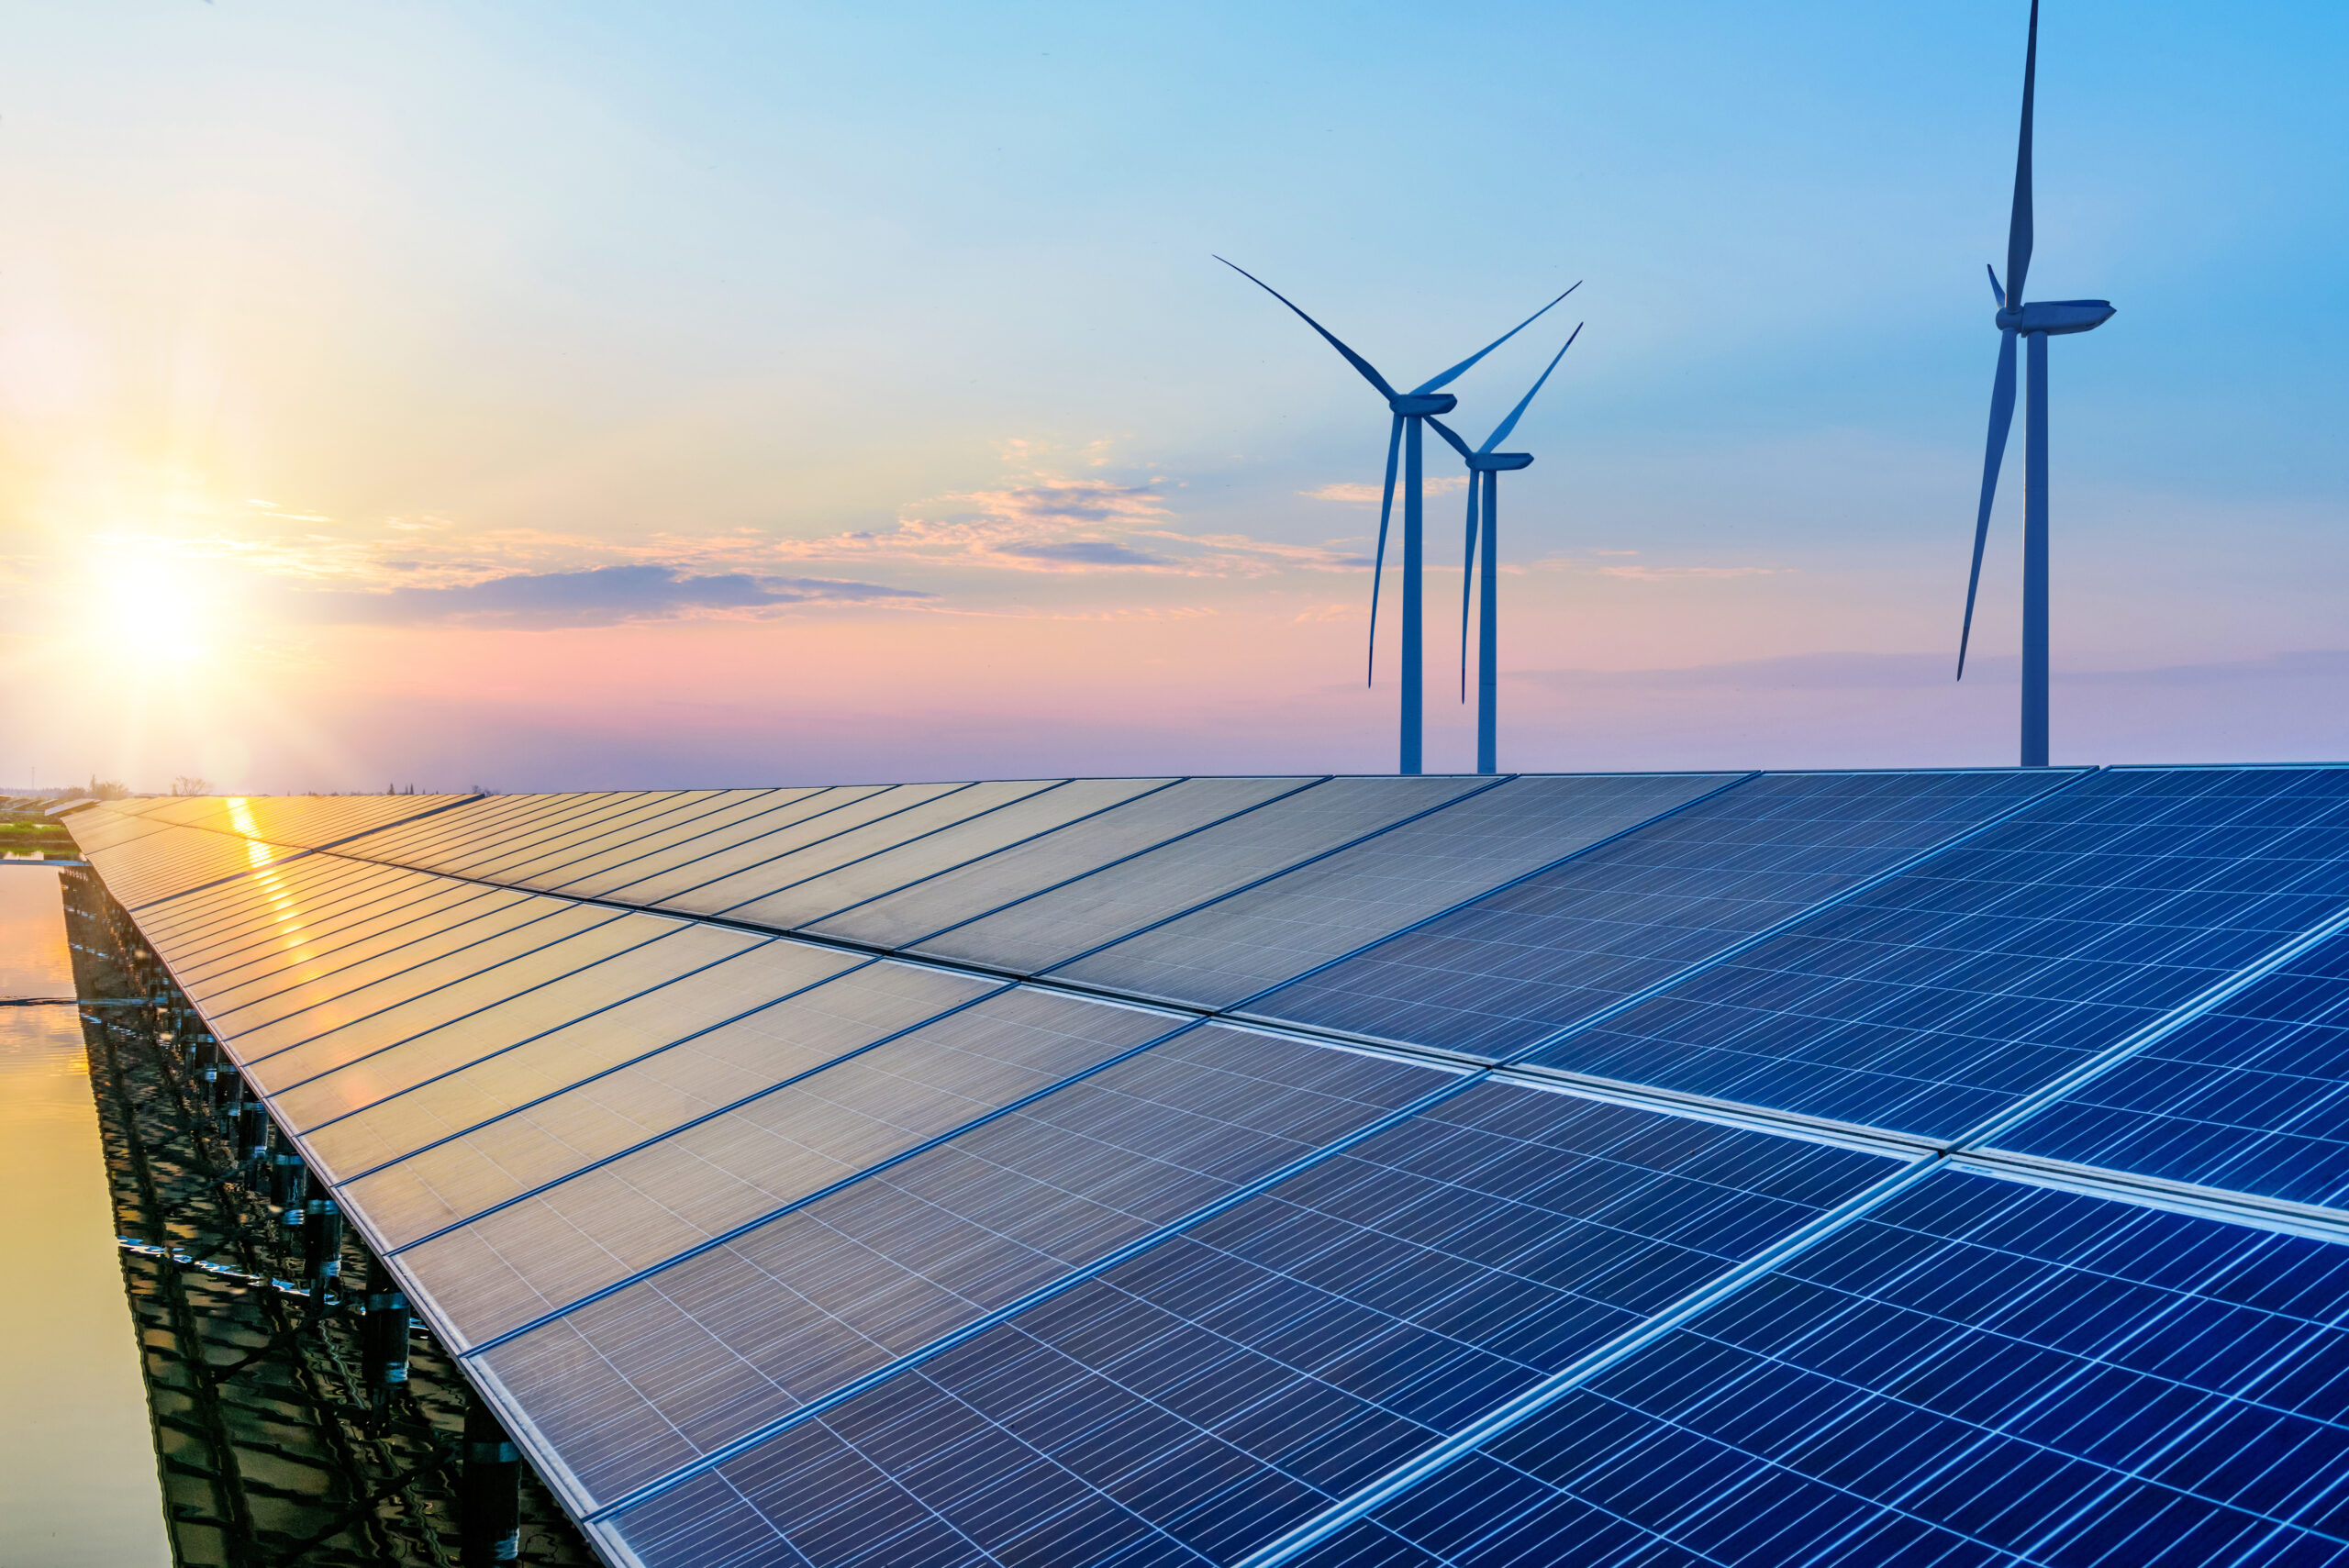 Top Seven Tips When Introducing Renewable Energy to the Data Center